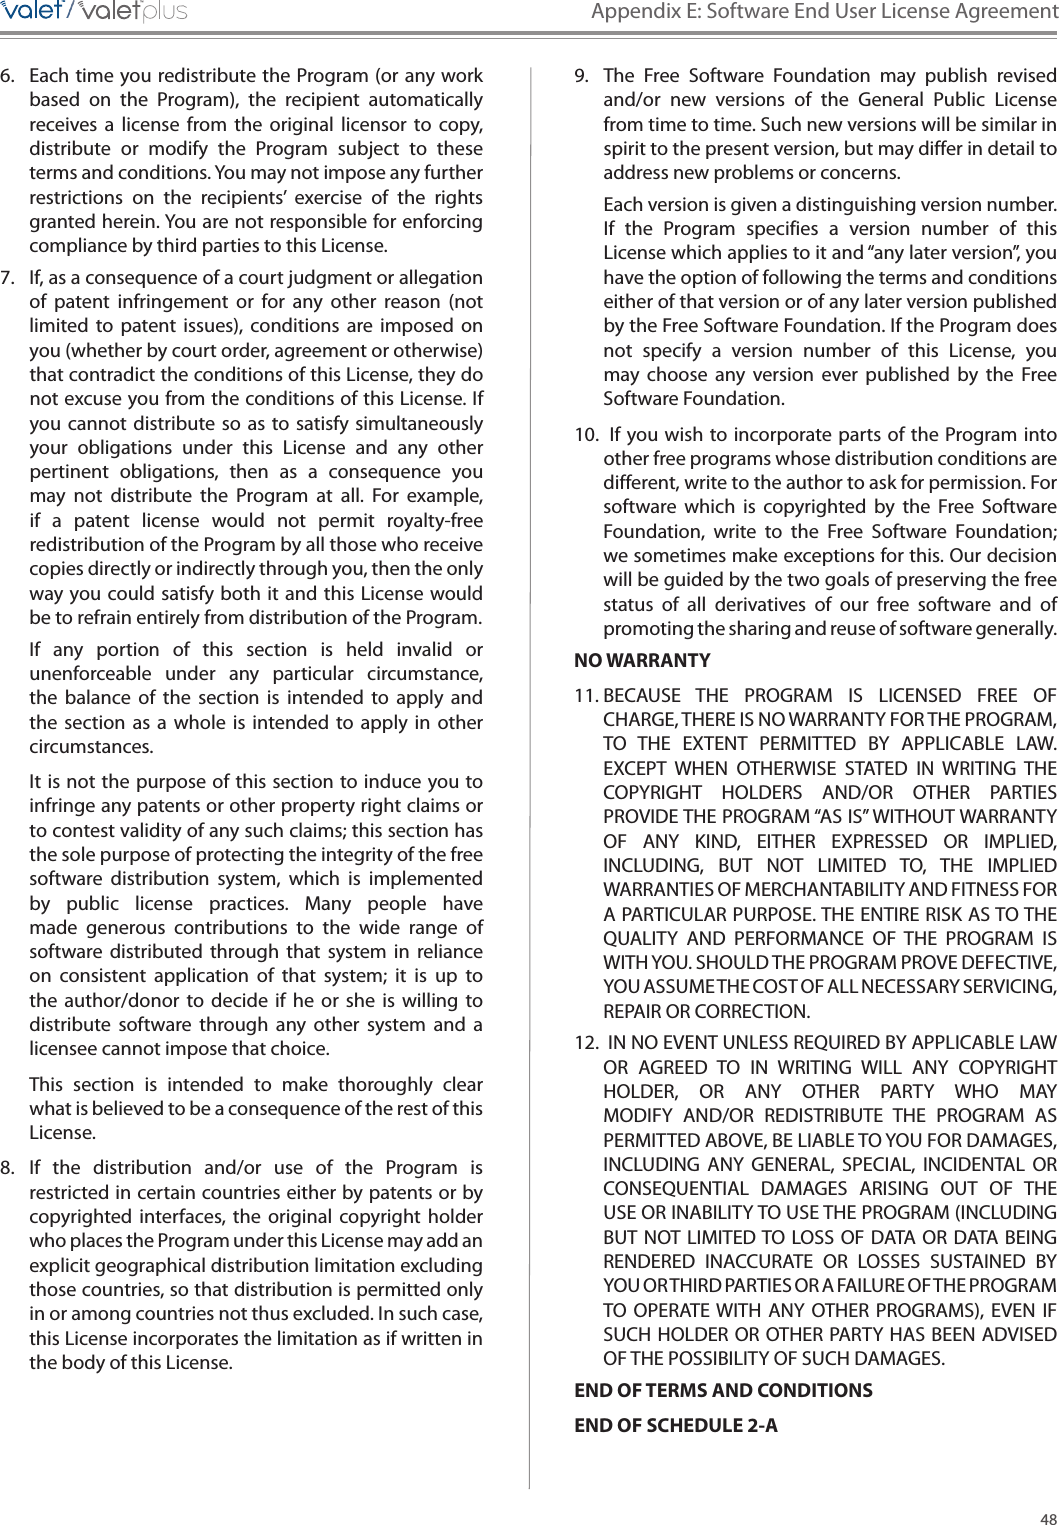 48Appendix E: Software End User License Agreement/////6.  Each time you redistribute the Program (or any work based  on  the  Program),  the  recipient  automatically receives  a  license  from  the  original  licensor  to  copy, distribute  or  modify  the  Program  subject  to  these terms and conditions. You may not impose any further restrictions  on  the  recipients’  exercise  of  the  rights granted herein. You are not responsible for enforcing compliance by third parties to this License. 7.  If, as a consequence of a court judgment or allegation of  patent  infringement  or  for  any  other  reason  (not limited  to  patent  issues),  conditions  are  imposed  on you (whether by court order, agreement or otherwise) that contradict the conditions of this License, they do not excuse you from the conditions of this License. If you cannot  distribute so  as  to satisfy  simultaneously your  obligations  under  this  License  and  any  other pertinent  obligations,  then  as  a  consequence  you may  not  distribute  the  Program  at  all.  For  example, if  a  patent  license  would  not  permit  royalty-free redistribution of the Program by all those who receive copies directly or indirectly through you, then the only way you could satisfy both it  and  this License would be to refrain entirely from distribution of the Program. If  any  portion  of  this  section  is  held  invalid  or unenforceable  under  any  particular  circumstance, the  balance  of  the  section  is  intended  to  apply  and the  section  as  a  whole  is  intended  to  apply  in  other circumstances. It is not the purpose of this section to induce you to infringe any patents or other property right claims or to contest validity of any such claims; this section has the sole purpose of protecting the integrity of the free software  distribution  system,  which  is  implemented by  public  license  practices.  Many  people  have made  generous  contributions  to  the  wide  range  of software  distributed  through that  system  in  reliance on  consistent  application  of  that  system;  it  is  up  to the  author/donor  to  decide  if  he  or  she  is  willing  to distribute  software  through  any  other  system  and  a licensee cannot impose that choice. This  section  is  intended  to  make  thoroughly  clear what is believed to be a consequence of the rest of this License. 8.  If  the  distribution  and/or  use  of  the  Program  is restricted in certain countries either by patents or by copyrighted interfaces, the  original copyright  holder who places the Program under this License may add an explicit geographical distribution limitation excluding those countries, so that distribution is permitted only in or among countries not thus excluded. In such case, this License incorporates the limitation as if written in the body of this License. 9.  The  Free  Software  Foundation  may  publish  revised and/or  new  versions  of  the  General  Public  License from time to time. Such new versions will be similar in spirit to the present version, but may differ in detail to address new problems or concerns. Each version is given a distinguishing version number. If  the  Program  specifies  a  version  number  of  this License which applies to it and “any later version”, you have the option of following the terms and conditions either of that version or of any later version published by the Free Software Foundation. If the Program does not  specify  a  version  number  of  this  License,  you may  choose  any  version  ever  published  by  the  Free Software Foundation. 10.  If you wish to incorporate parts of the Program into other free programs whose distribution conditions are different, write to the author to ask for permission. For software  which  is  copyrighted  by  the  Free  Software Foundation,  write  to  the  Free  Software  Foundation; we sometimes make exceptions for this. Our decision will be guided by the two goals of preserving the free status  of  all  derivatives  of  our  free  software  and  of promoting the sharing and reuse of software generally. NO WARRANTY11. BECAUSE  THE  PROGRAM  IS  LICENSED  FREE  OF CHARGE, THERE IS NO WARRANTY FOR THE PROGRAM, TO  THE  EXTENT  PERMITTED  BY  APPLICABLE  LAW. EXCEPT  WHEN  OTHERWISE  STATED  IN  WRITING  THE COPYRIGHT  HOLDERS  AND/OR  OTHER  PARTIES PROVIDE THE PROGRAM “AS IS” WITHOUT WARRANTY OF  ANY  KIND,  EITHER  EXPRESSED  OR  IMPLIED, INCLUDING,  BUT  NOT  LIMITED  TO,  THE  IMPLIED WARRANTIES OF MERCHANTABILITY AND FITNESS FOR A PARTICULAR PURPOSE. THE ENTIRE RISK AS TO THE QUALITY  AND  PERFORMANCE  OF  THE  PROGRAM  IS WITH YOU. SHOULD THE PROGRAM PROVE DEFECTIVE, YOU ASSUME THE COST OF ALL NECESSARY SERVICING, REPAIR OR CORRECTION. 12.  IN NO EVENT UNLESS REQUIRED BY APPLICABLE LAW OR  AGREED  TO  IN  WRITING  WILL  ANY  COPYRIGHT HOLDER,  OR  ANY  OTHER  PARTY  WHO  MAY MODIFY  AND/OR  REDISTRIBUTE  THE  PROGRAM  AS PERMITTED ABOVE, BE LIABLE TO YOU FOR DAMAGES, INCLUDING  ANY  GENERAL,  SPECIAL,  INCIDENTAL  OR CONSEQUENTIAL  DAMAGES  ARISING  OUT  OF  THE USE OR INABILITY TO USE THE PROGRAM (INCLUDING BUT NOT LIMITED TO LOSS OF DATA OR  DATA BEING RENDERED  INACCURATE  OR  LOSSES  SUSTAINED  BY YOU OR THIRD PARTIES OR A FAILURE OF THE PROGRAM TO  OPERATE WITH  ANY  OTHER PROGRAMS),  EVEN  IF SUCH HOLDER OR OTHER PARTY HAS BEEN ADVISED OF THE POSSIBILITY OF SUCH DAMAGES. END OF TERMS AND CONDITIONSEND OF SCHEDULE 2-A